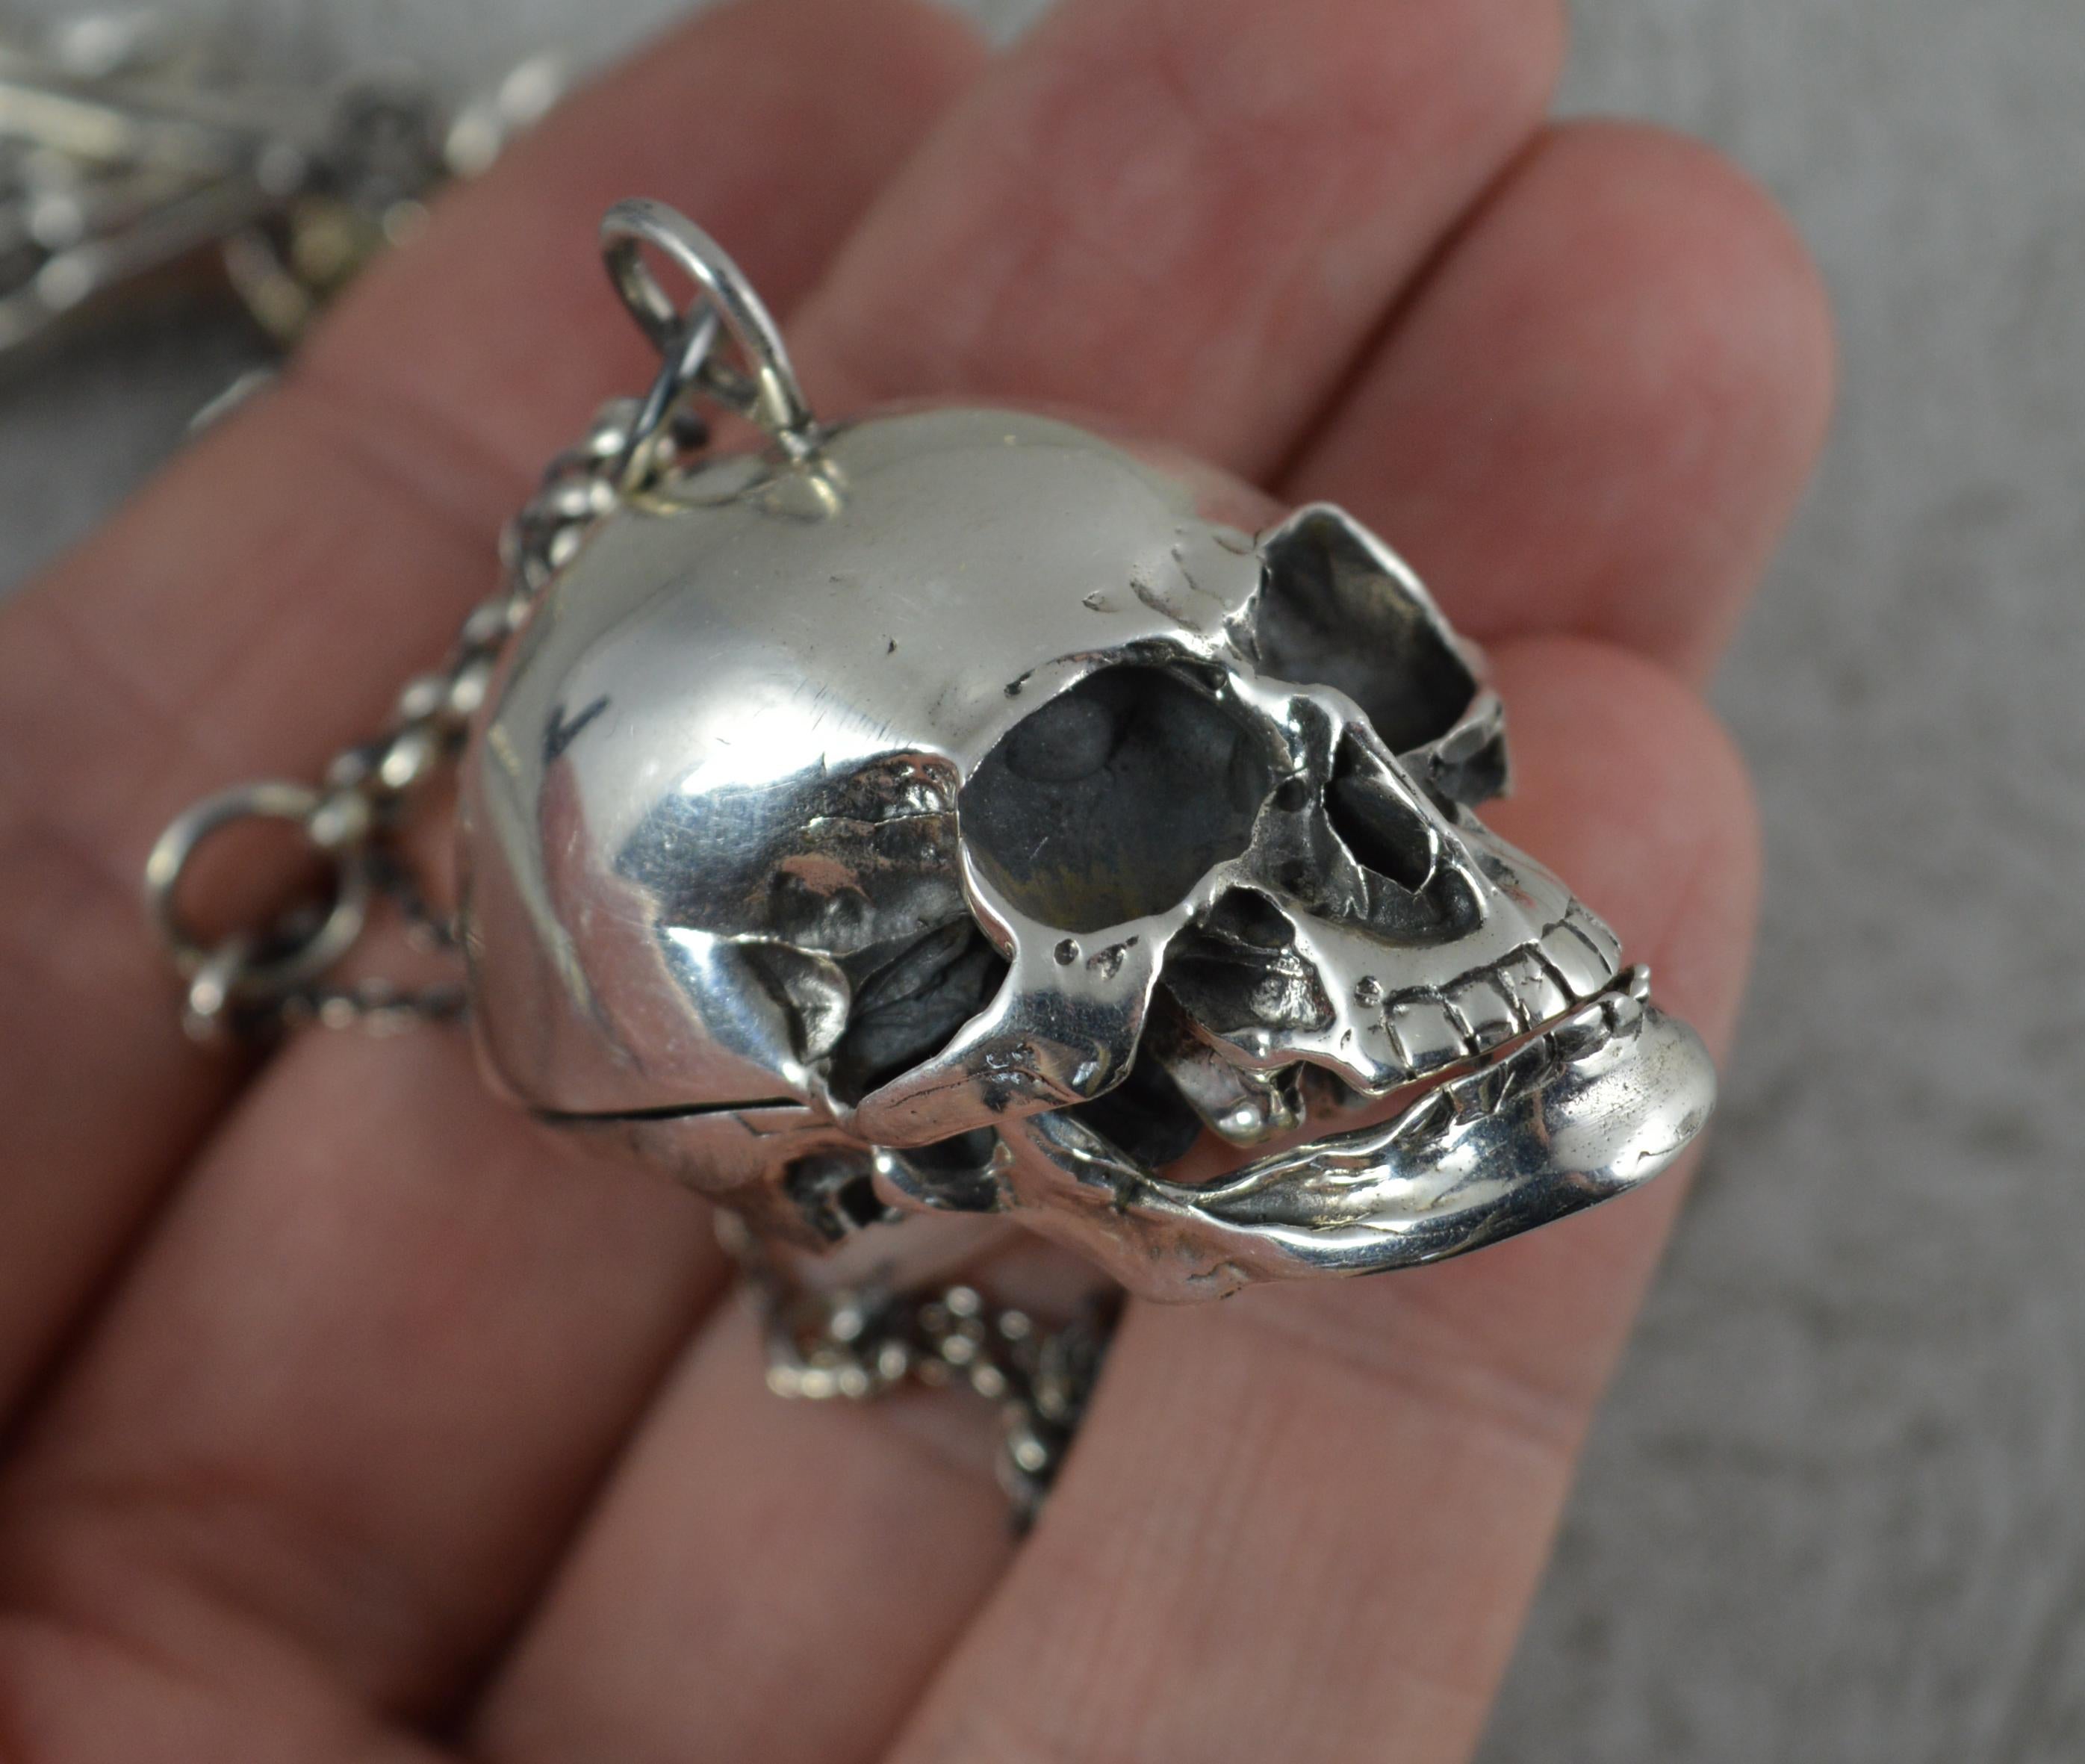 A superb and highly unusual gothic skull pendant and chain piece.
Designed with a plain pocket watch tbar with hand below. The chain includes a bone and skull and bone link. The end is set with a watch key type piece.
Complete with a large and heavy